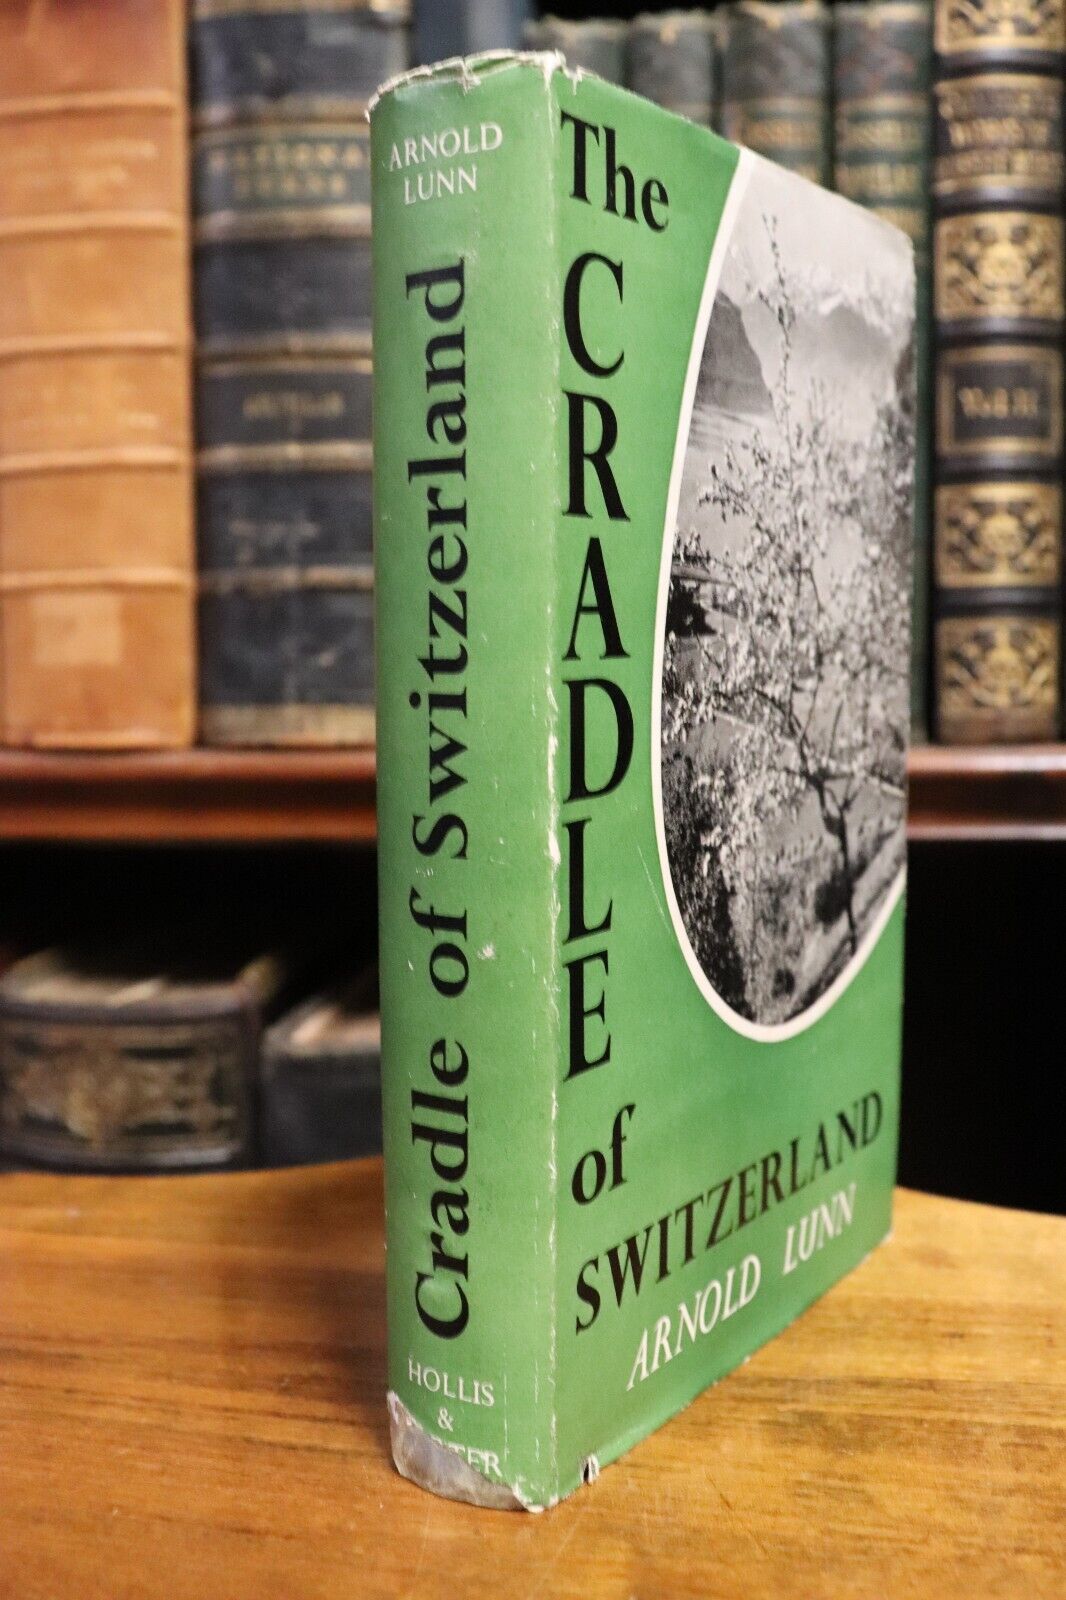 The Cradle Of Switzerland - 1952 - 1st Edition Vintage Travel Book